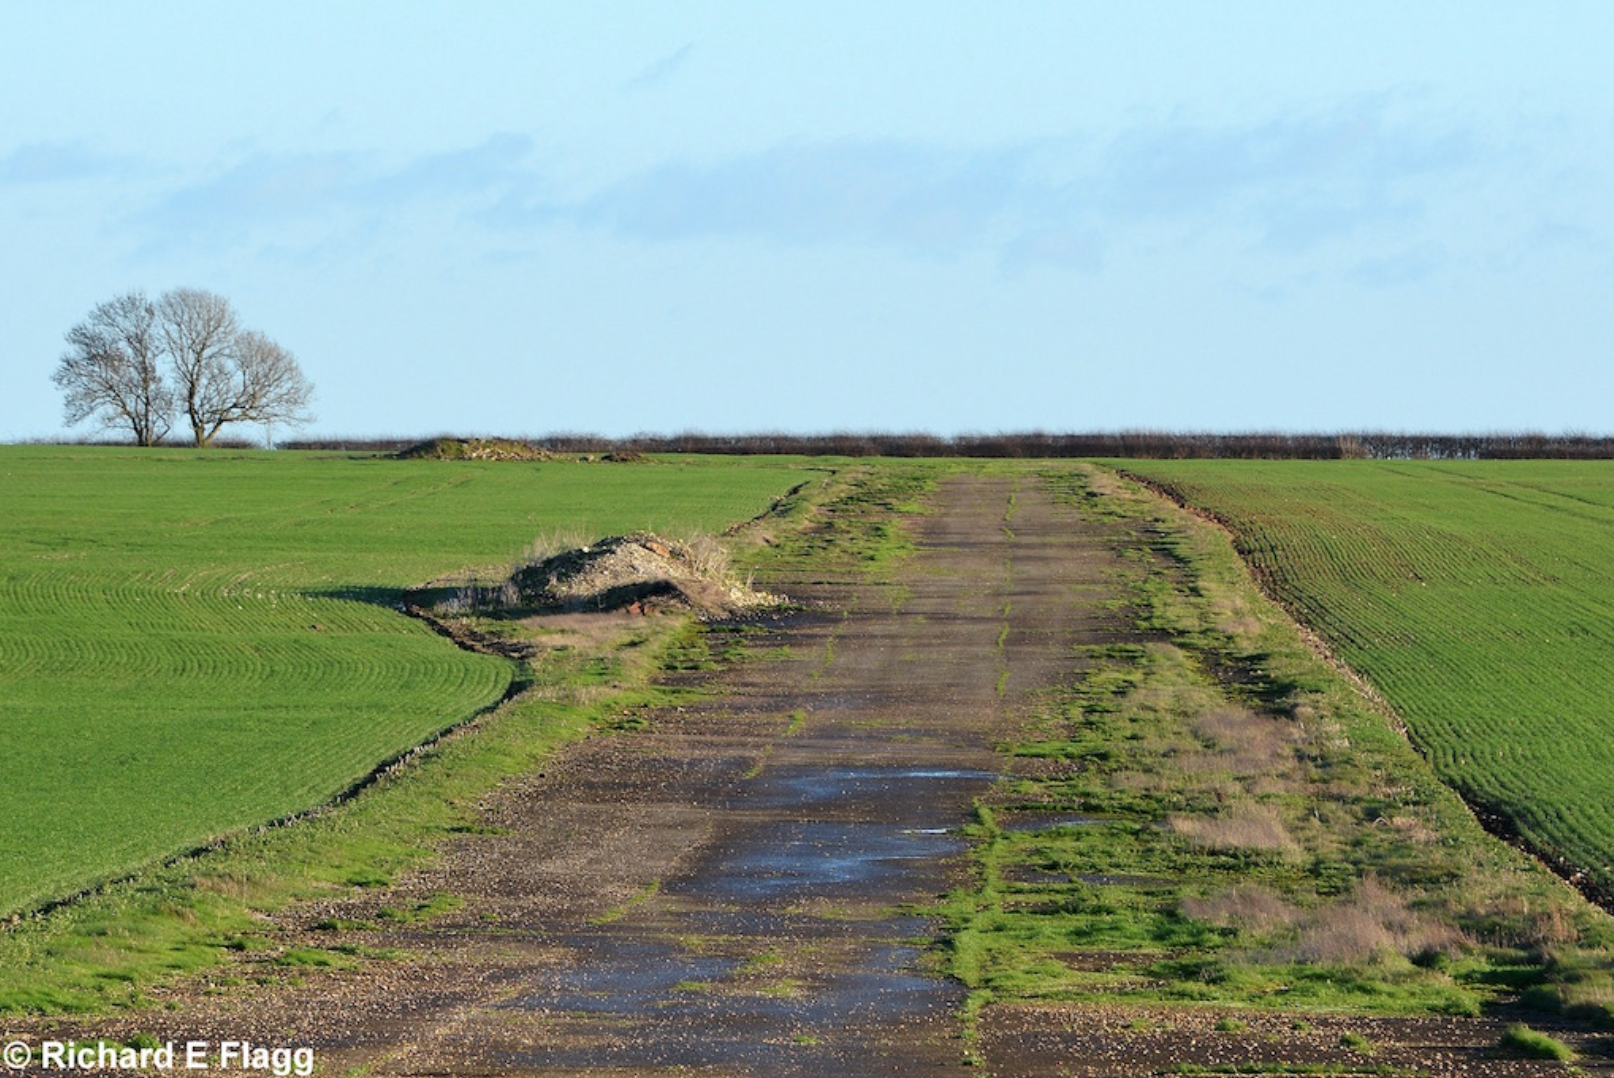 007Taxiway at the south of the airfield. Looking north east from the road that crosses the airfield - 31 December 2015.png